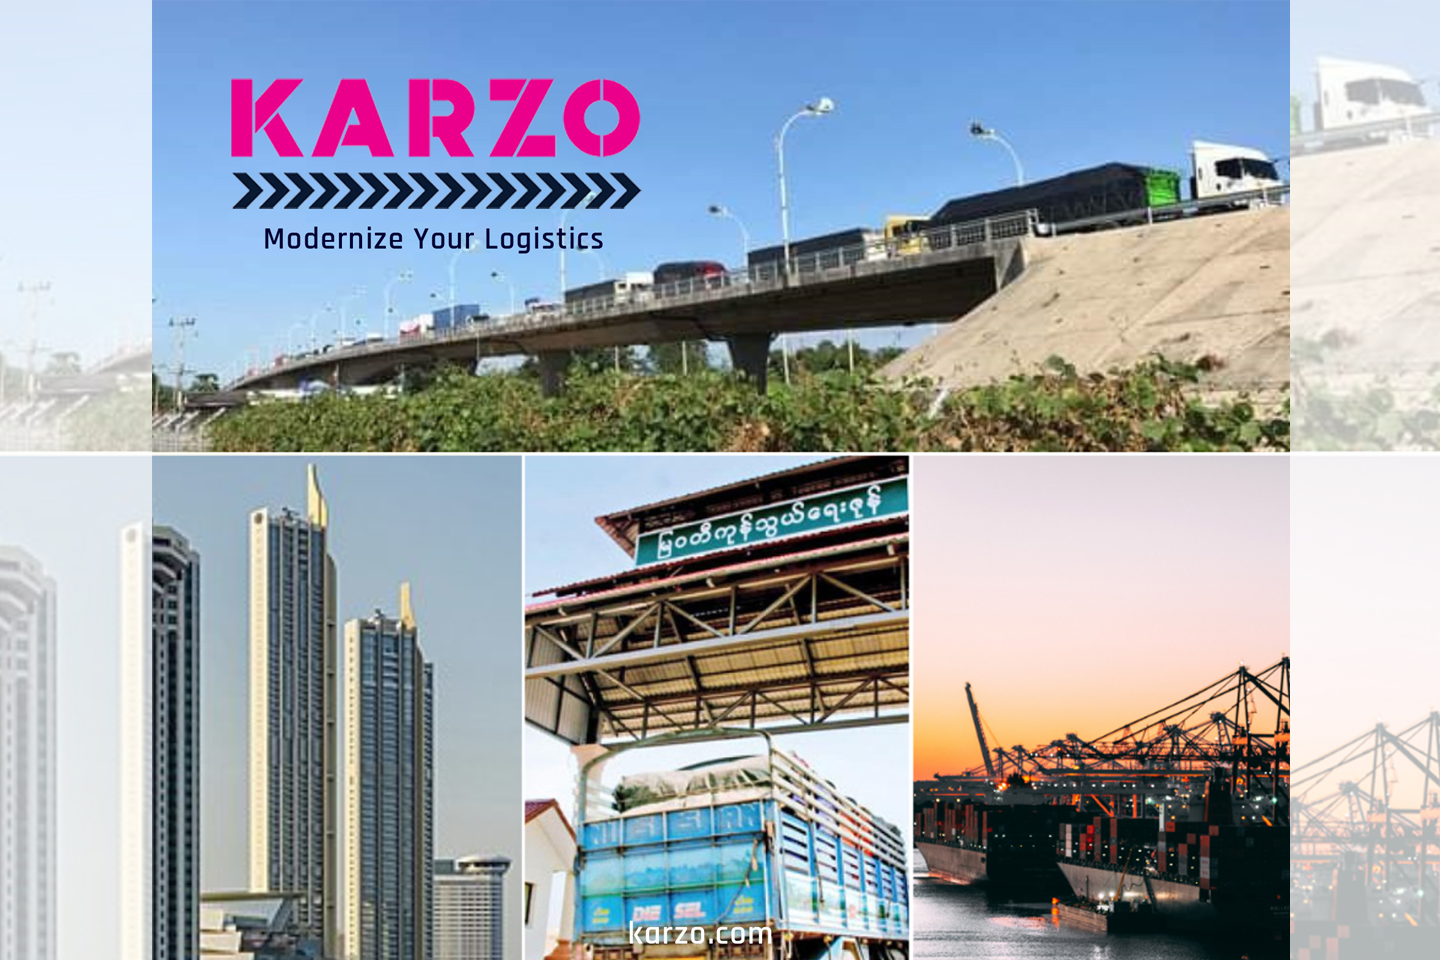 Karzo's Business Expansion in Thailand